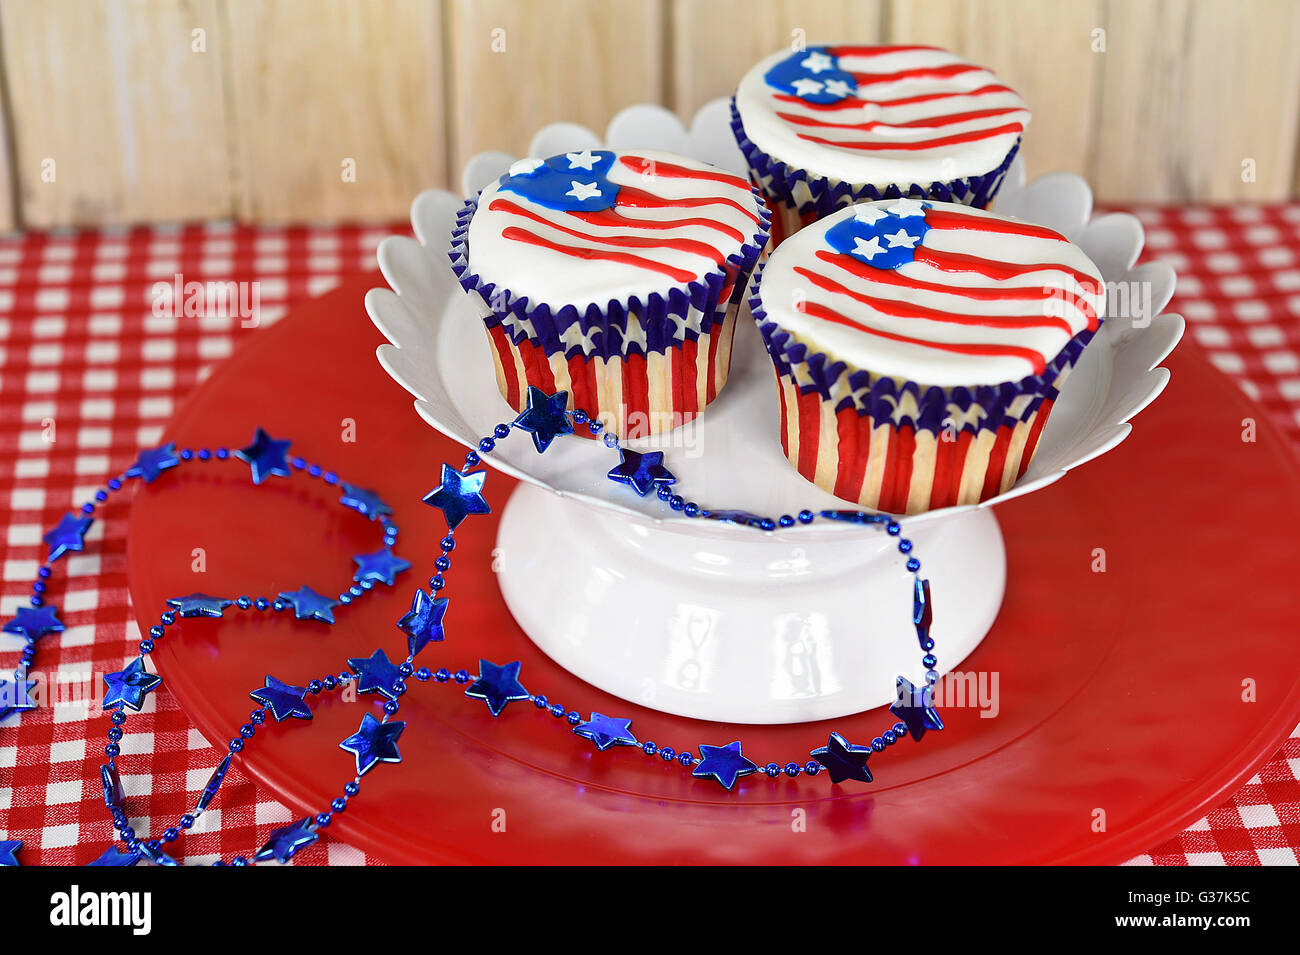 Flag frosting on patriotic cupcakes with blue star necklace decoration. Stock Photo